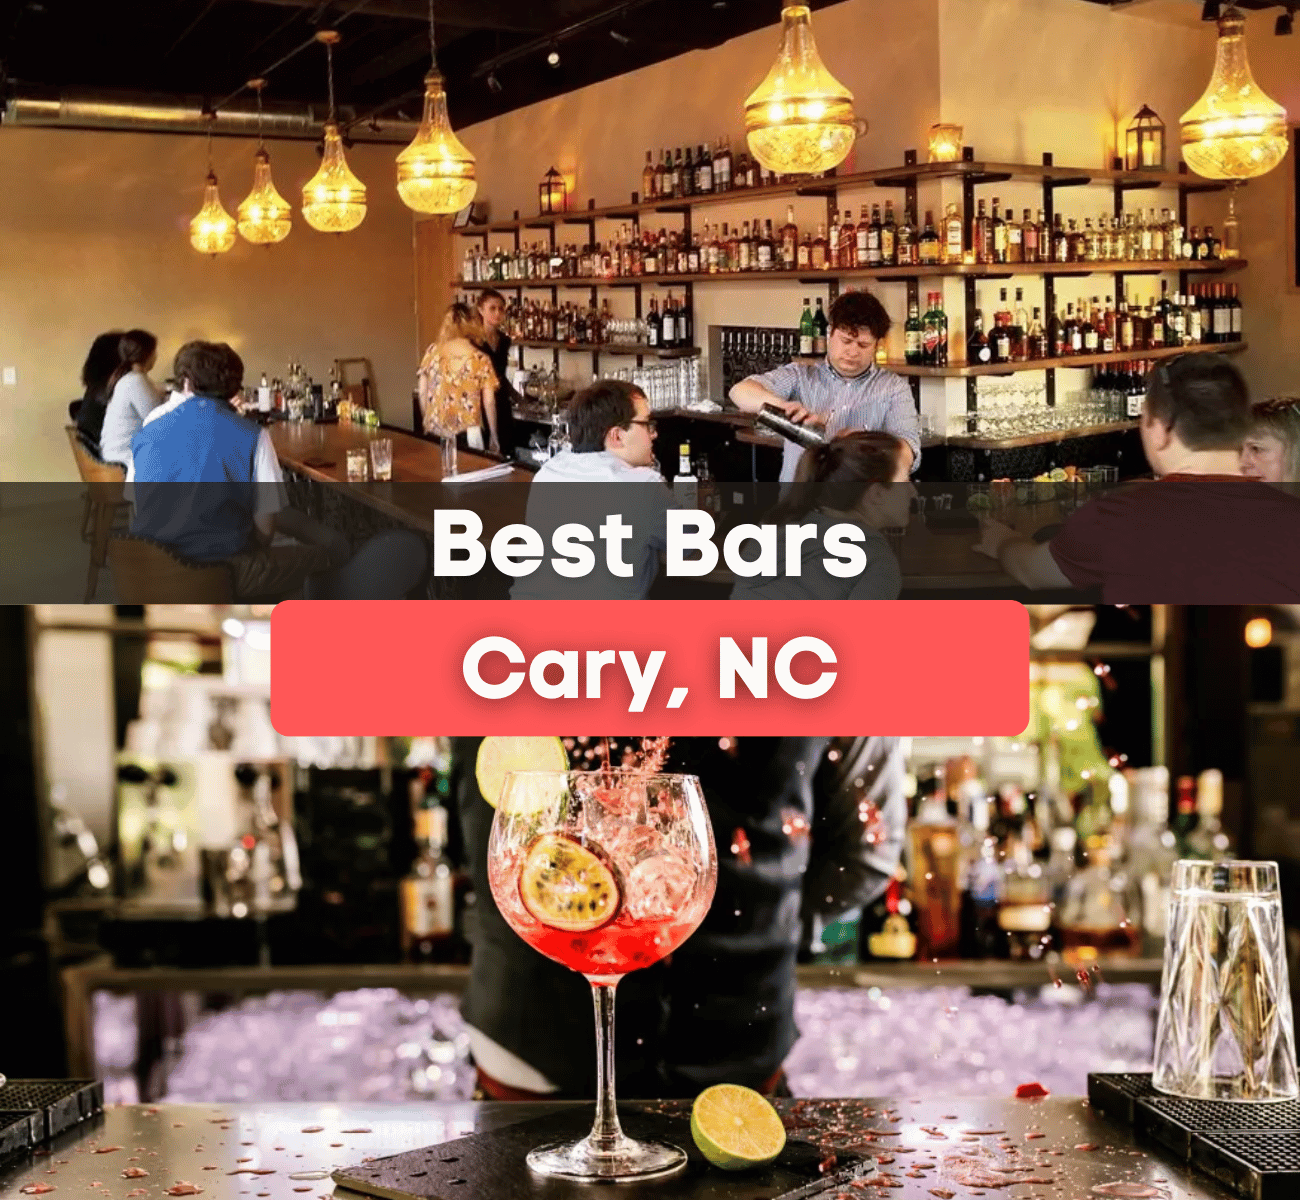 13 Best Bars In Cary, NC